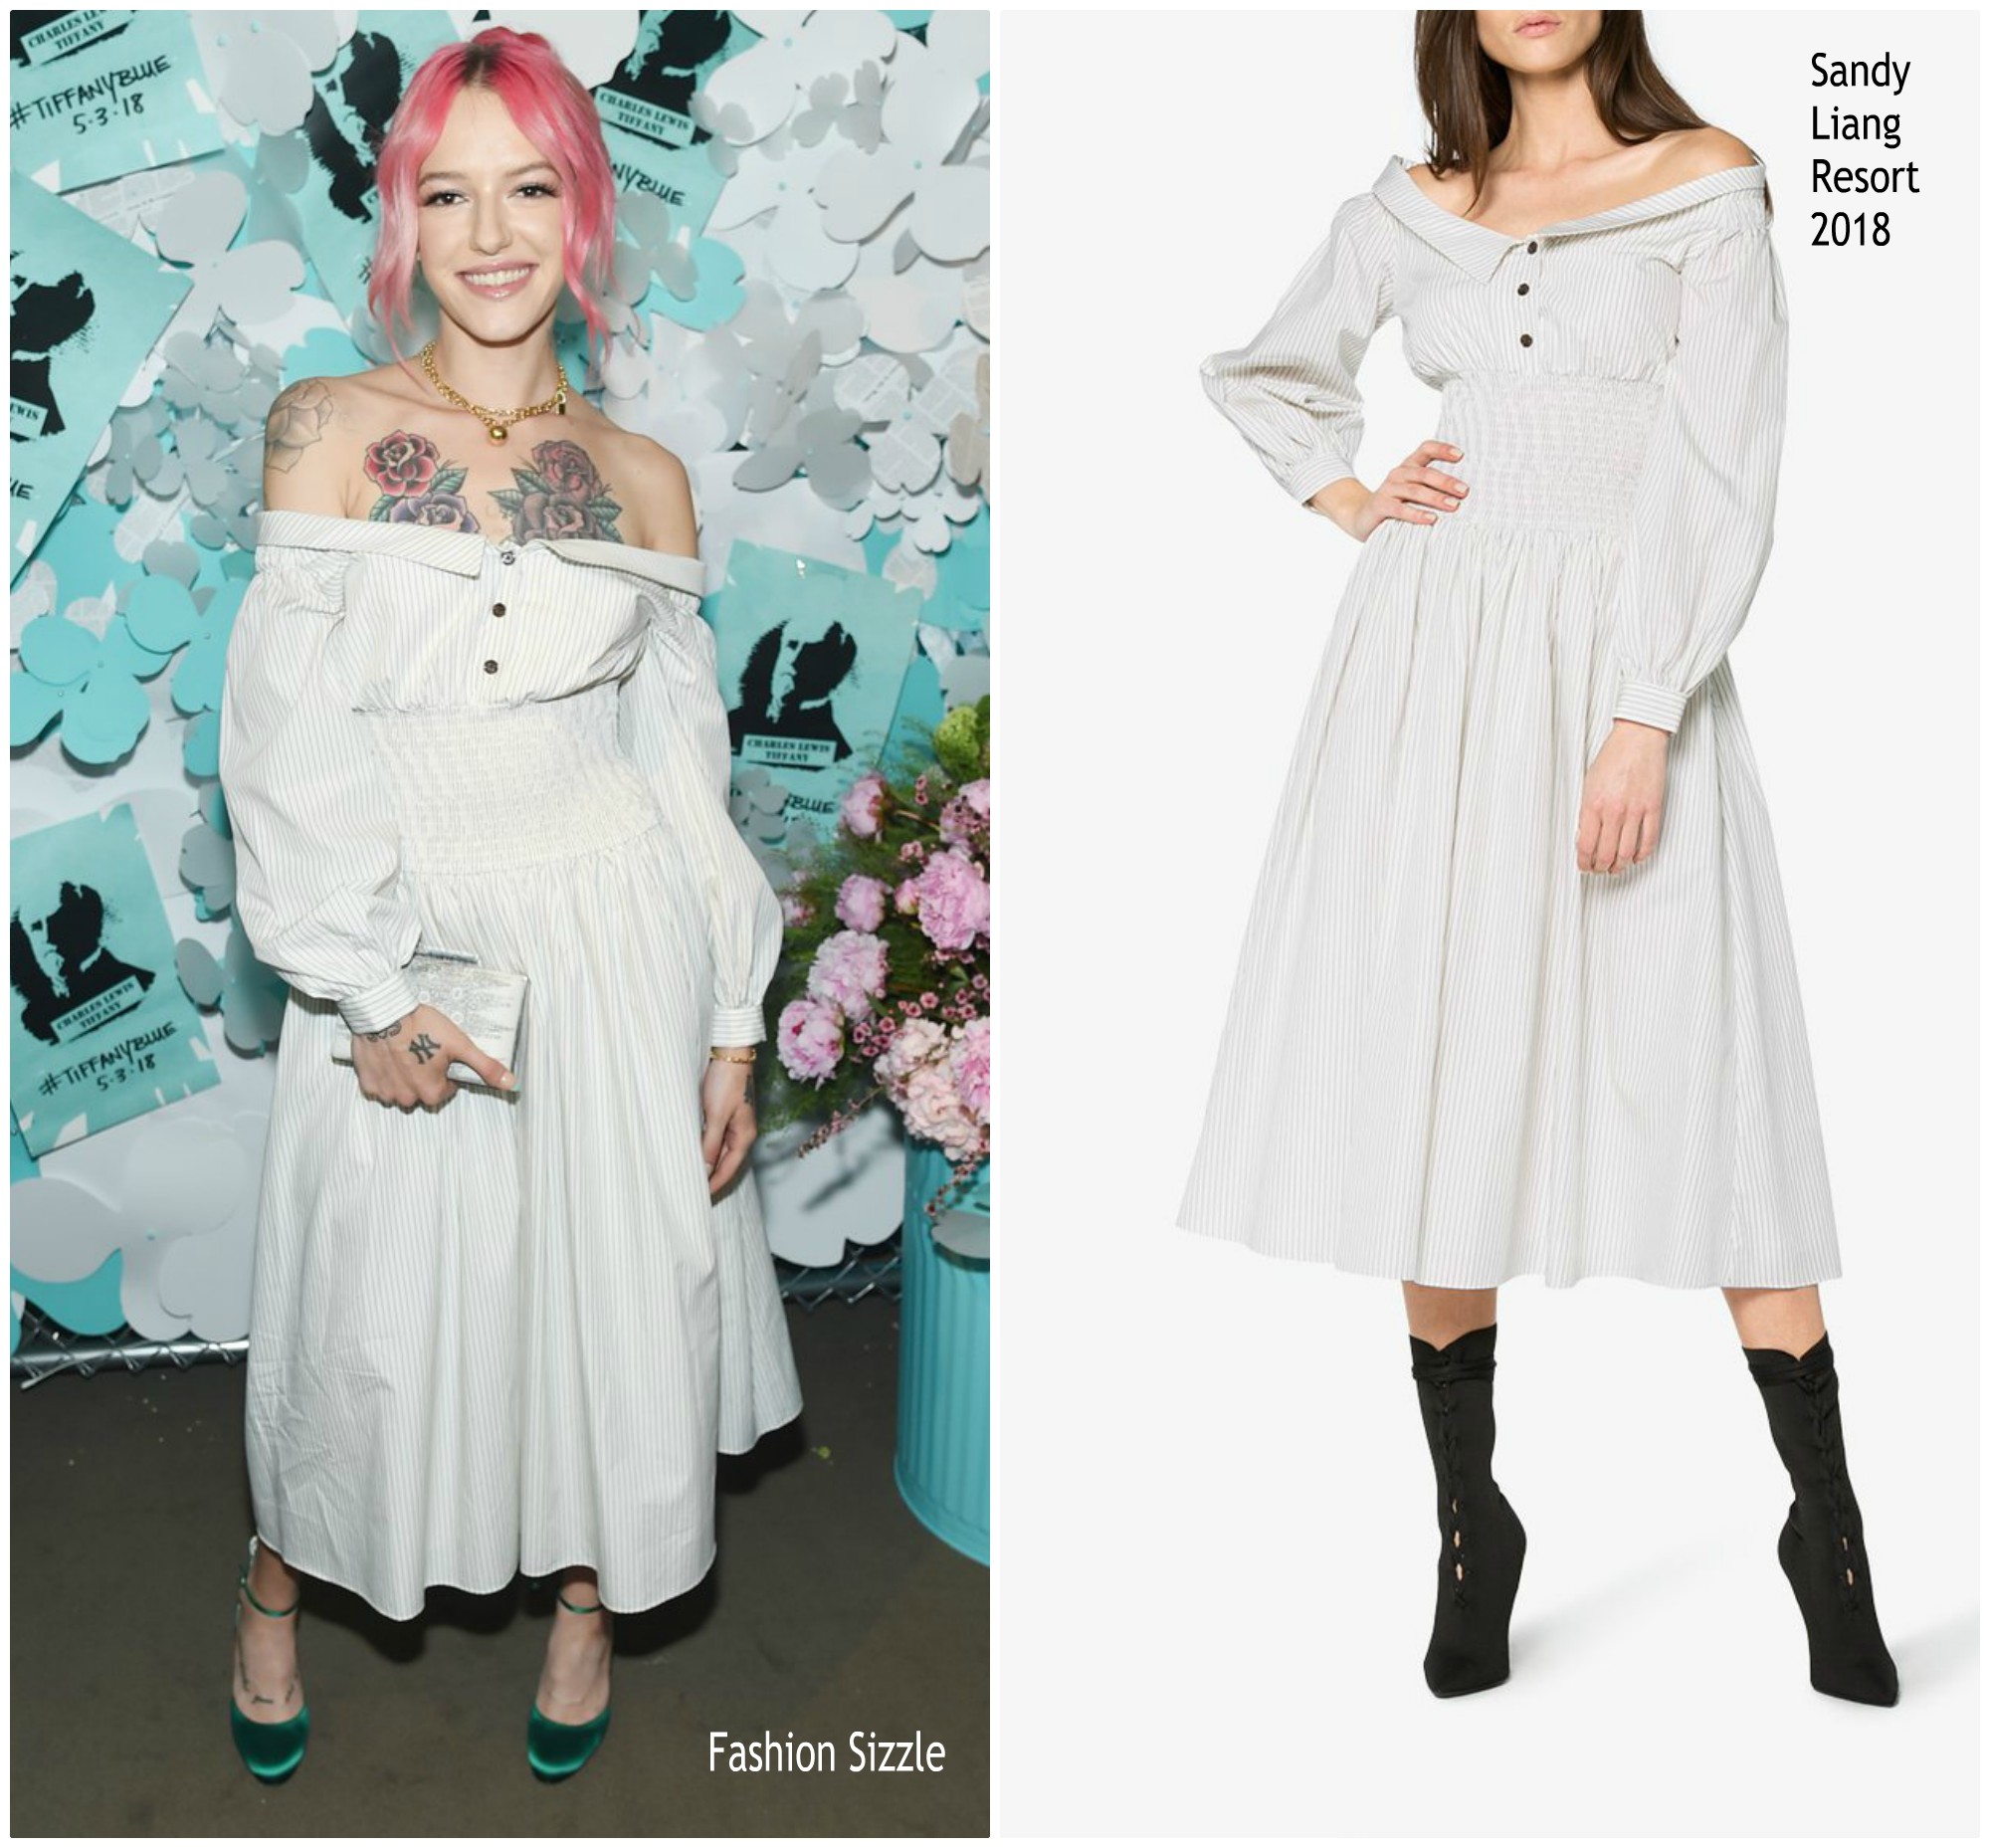 bria-vinaite-in-sandy-liang-tiffany-co-paper-flowers-event-and-believe-in-dreams–campaign-launch